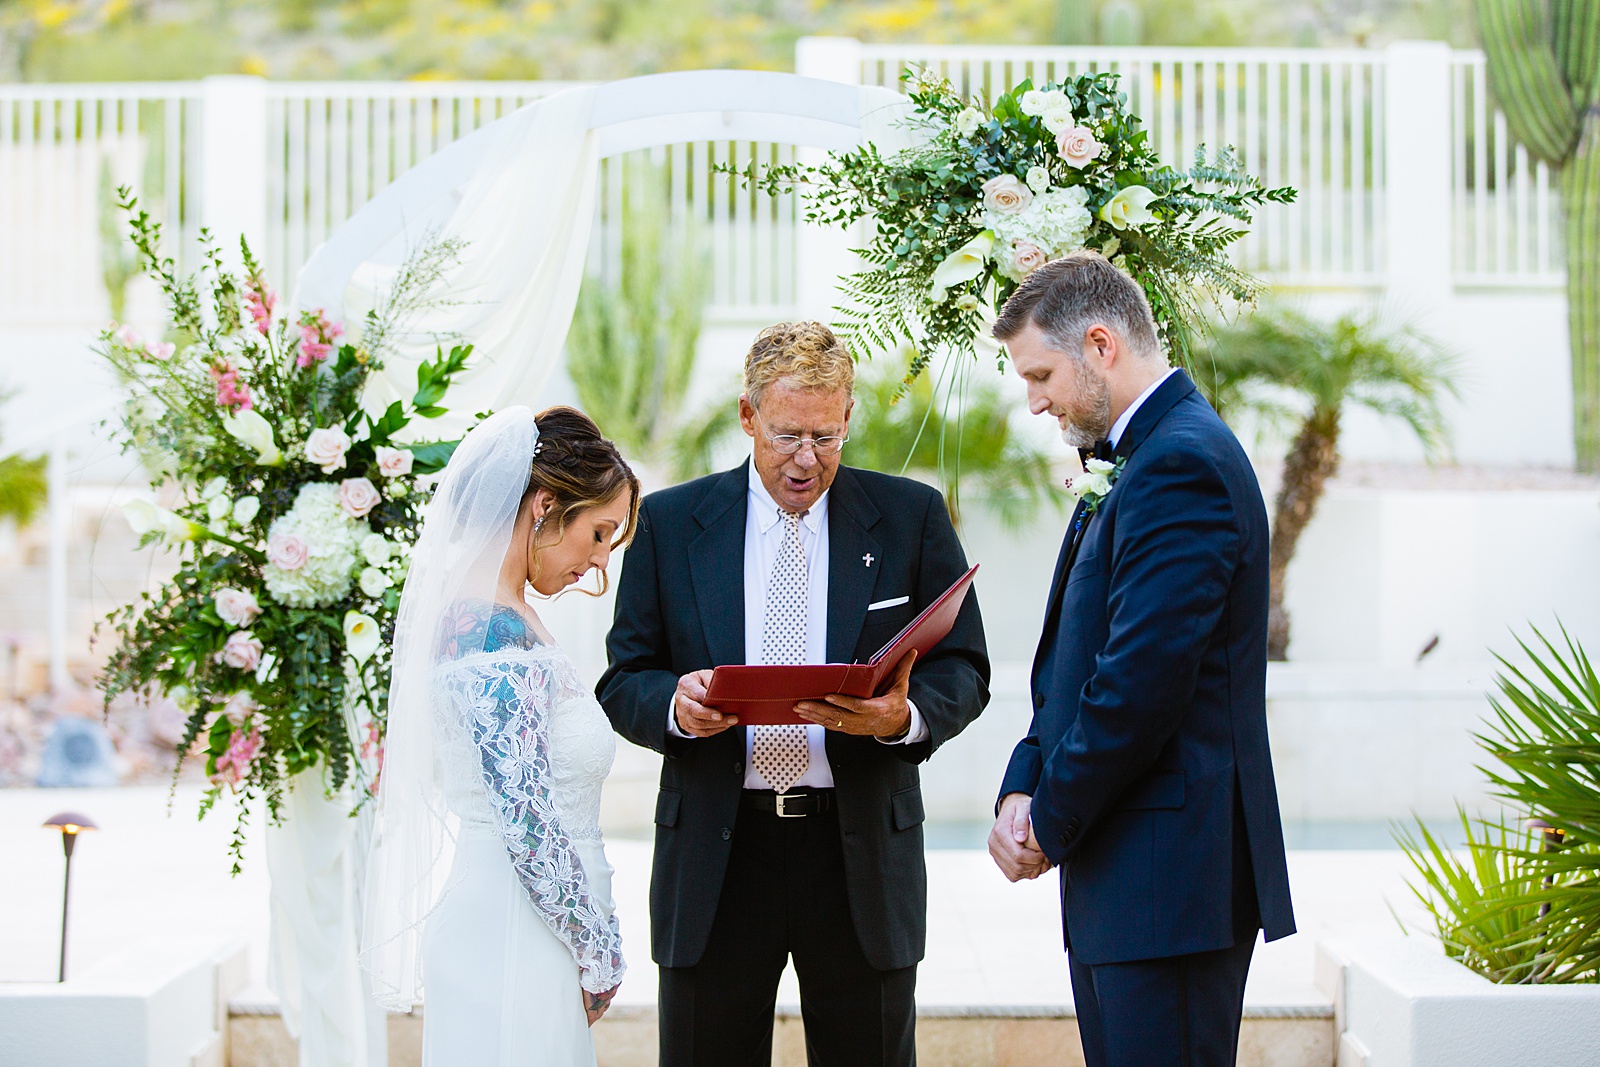 Bride and groom together during backyard wedding ceremony by Scottsdale wedding photographer PMA Photography.